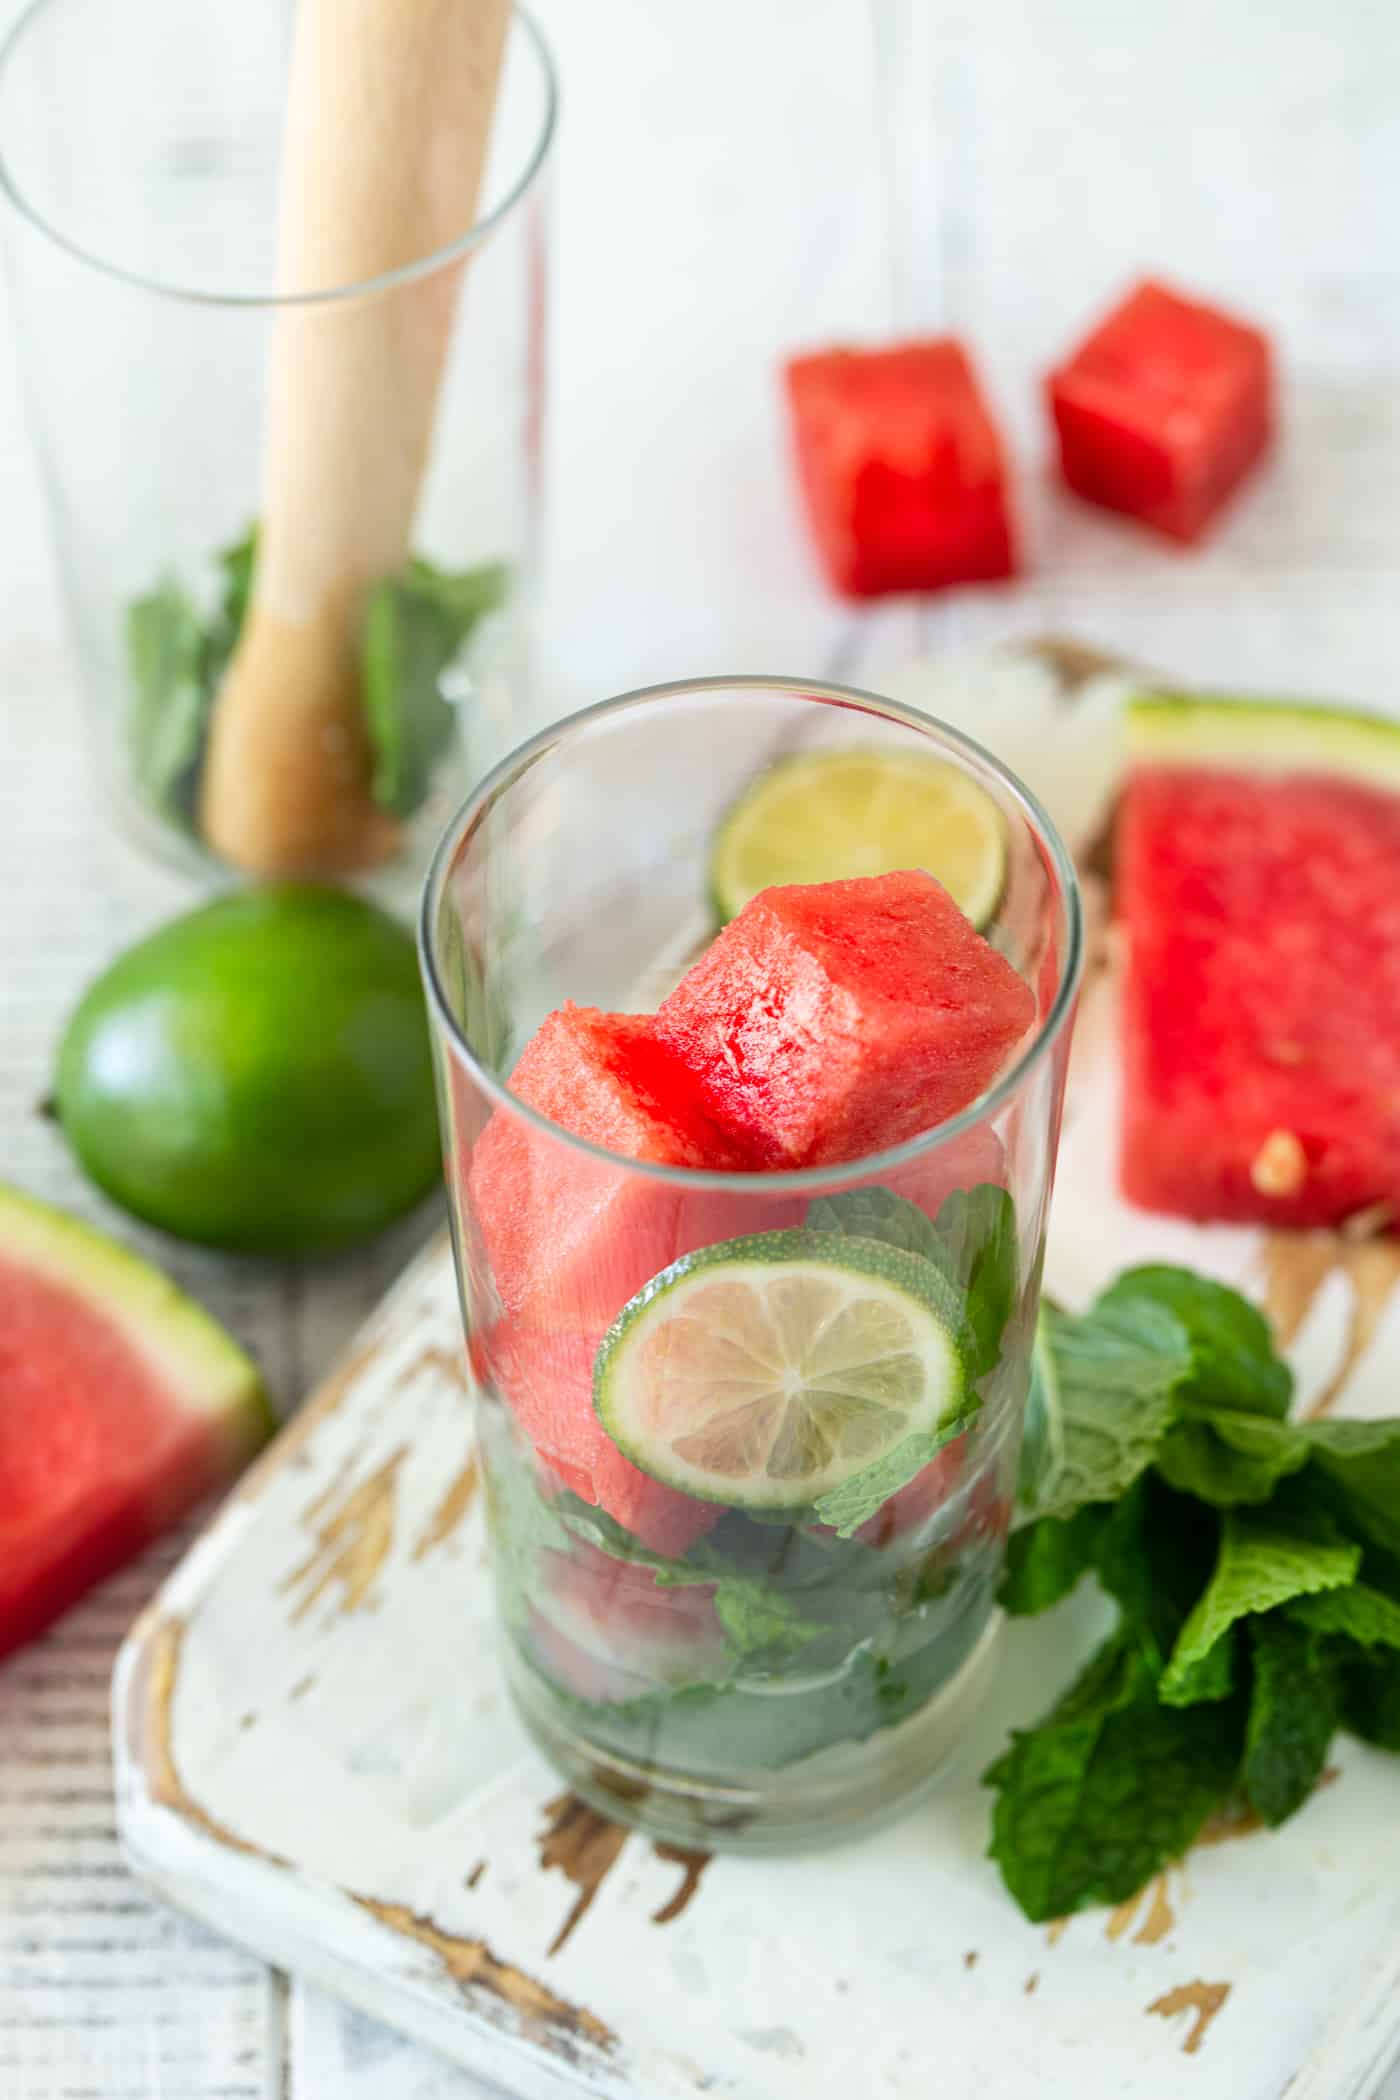 Highball glass filled with watermelon cubes, mint leaves, lime juice and sugar to make a watermelon mojito.